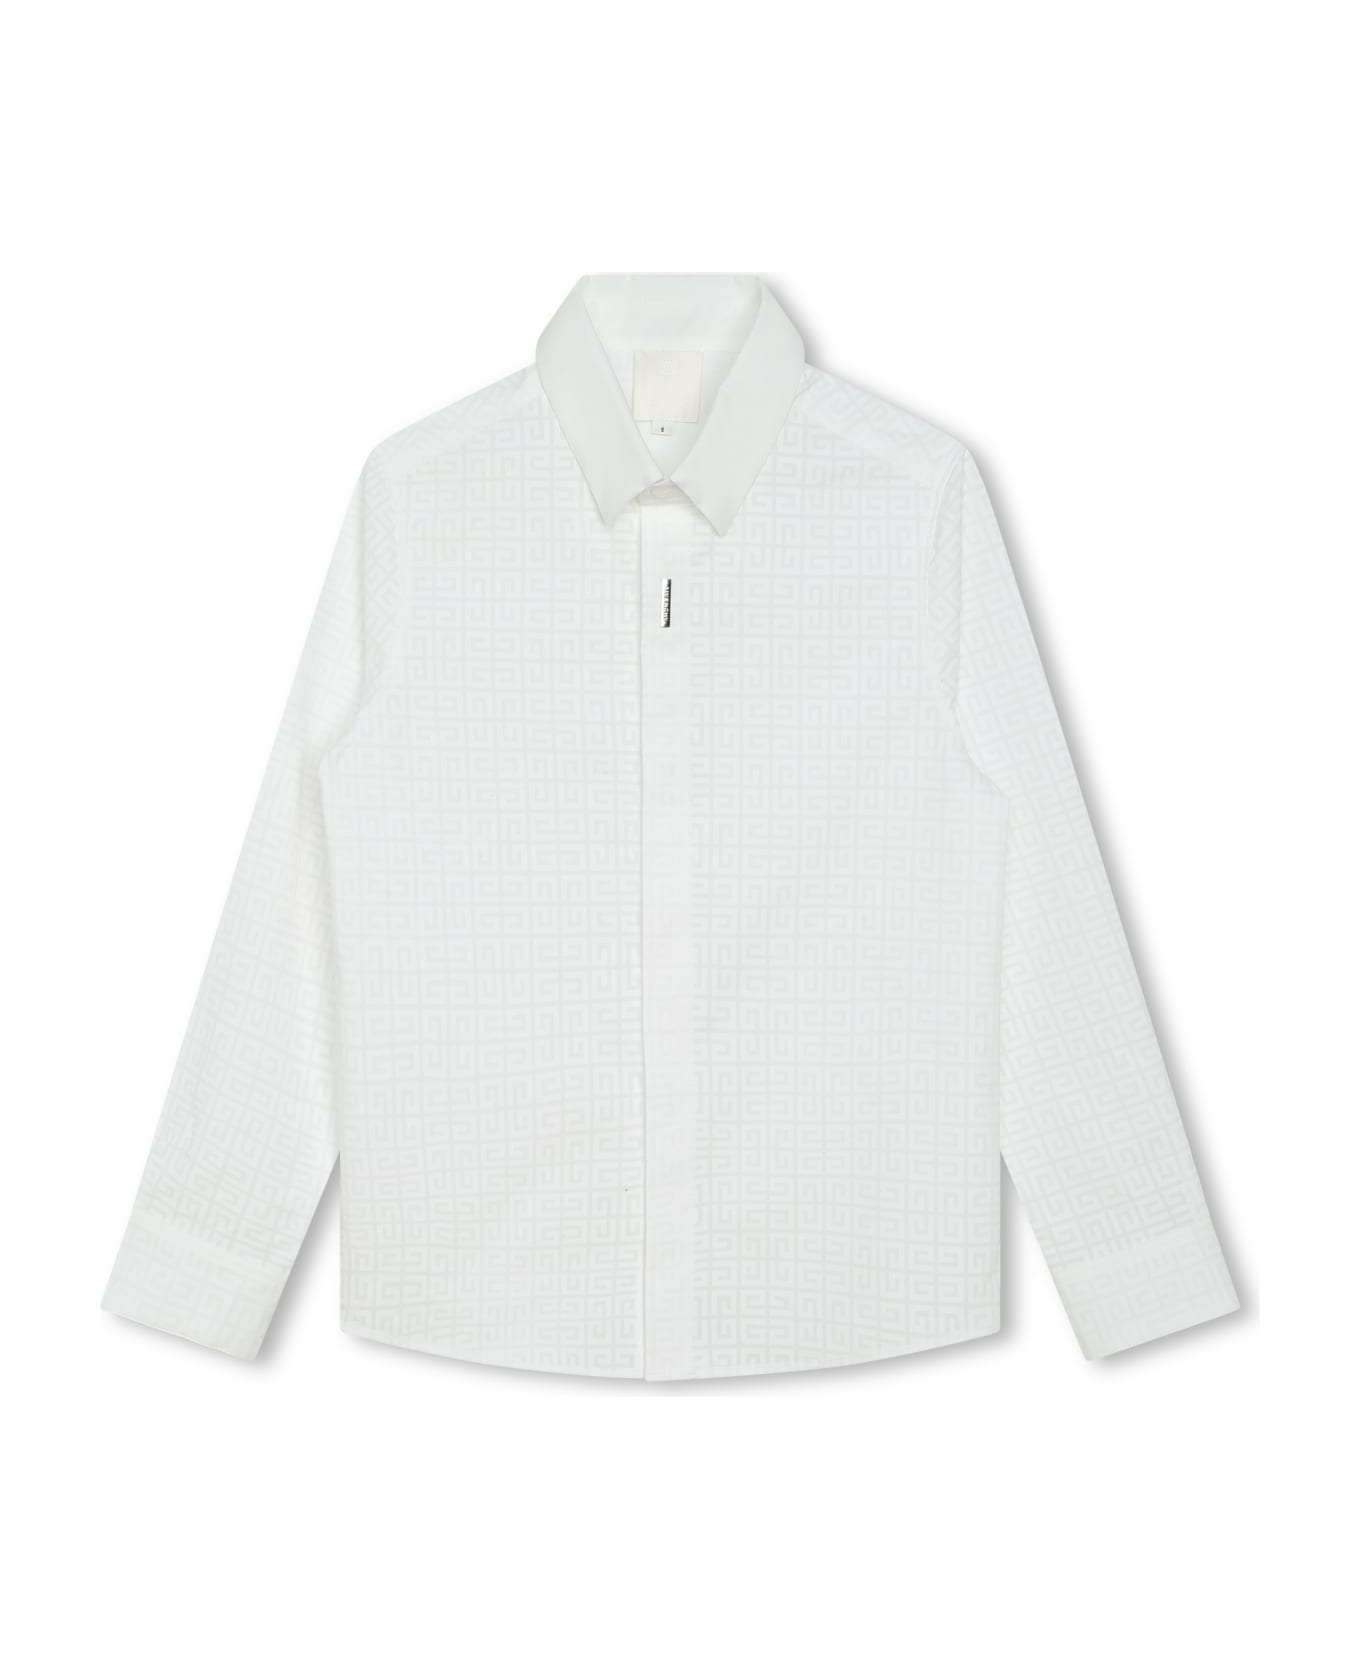 Givenchy Shirt With 4g Motif - White